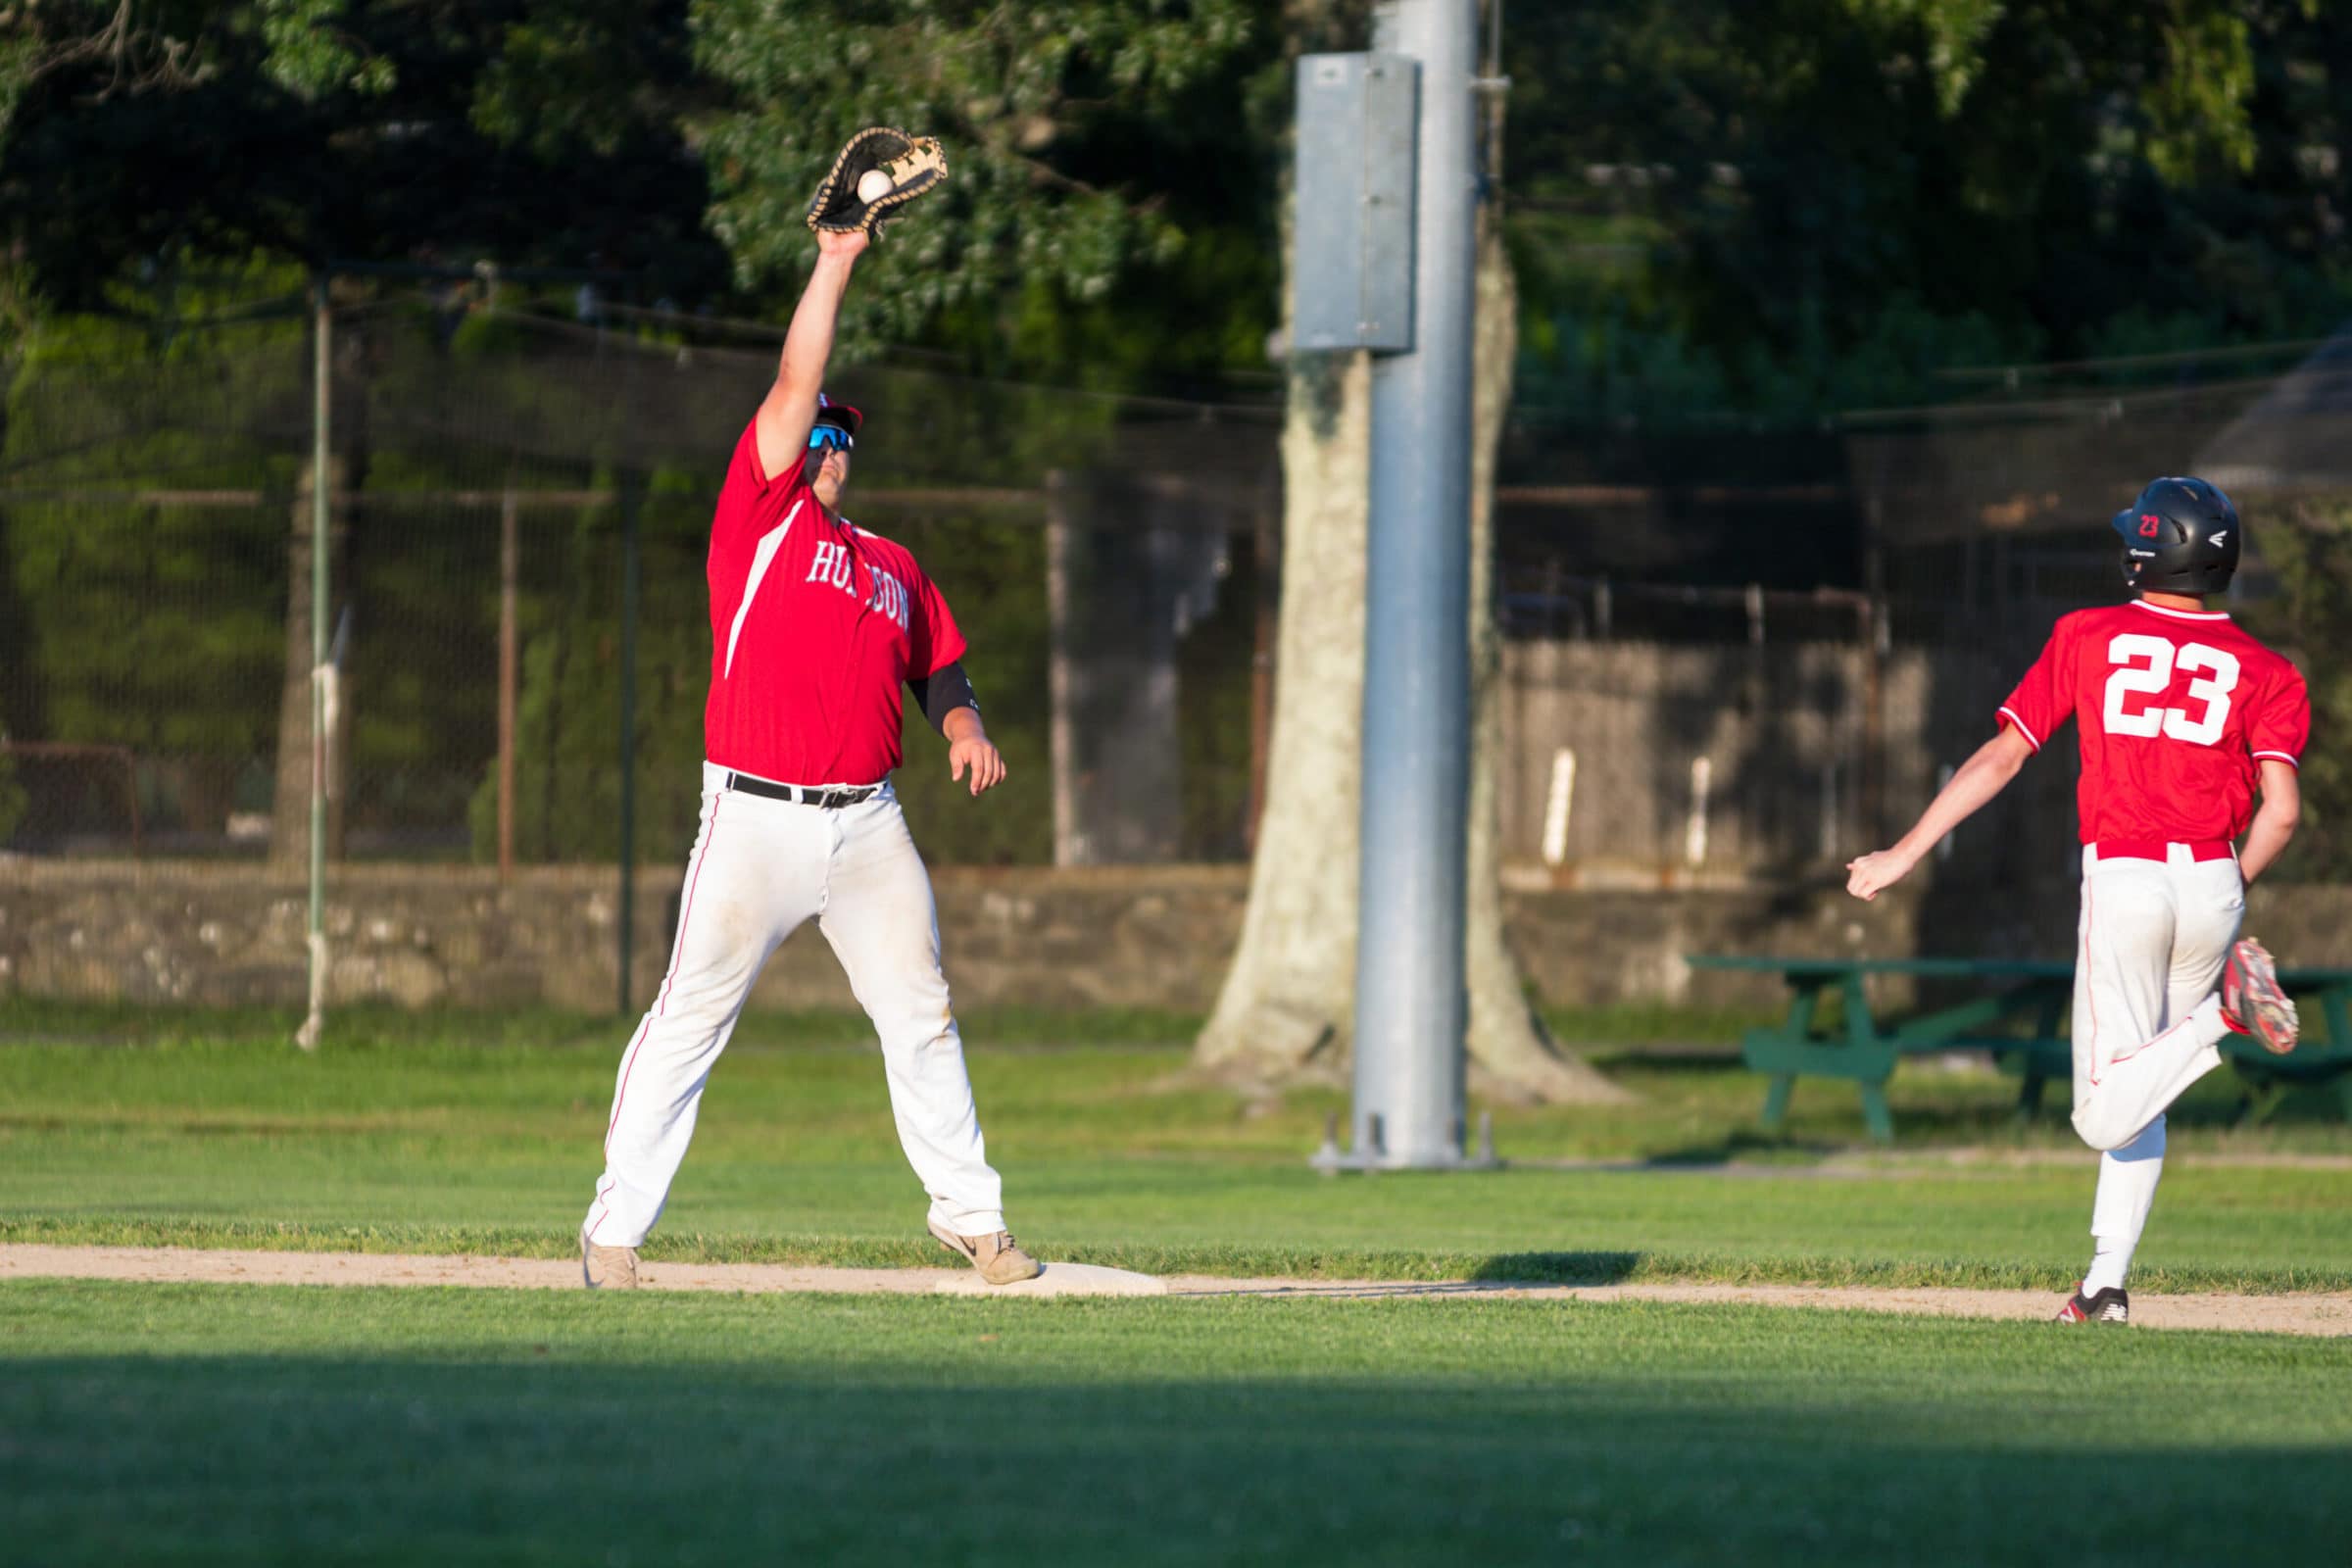 Hudson’s first basemen stretches to catch a throw from a teammate as their Natick opponent runs to beat the play.